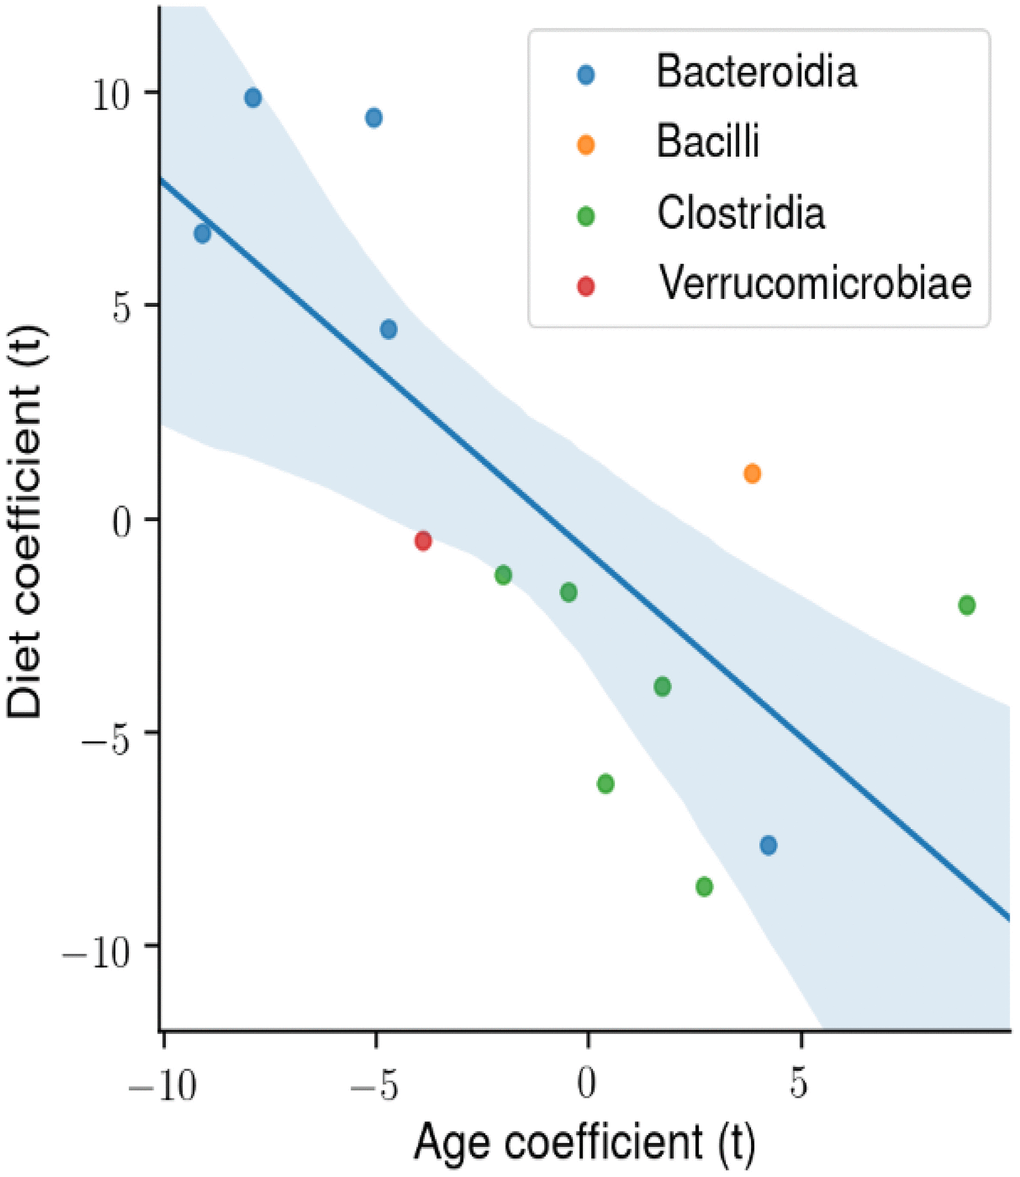 The degree of association between microbial taxa abundance, age, and diet. Using ordinary least squares (OLS) linear model, the t-statistic for each coefficient is plotted for the microbial phylogenetic classes: Bacteroidia, Bacilli, Clostridia, Verrucomicrobiae. There is a significant negative correlation between the age and diet t-statistic.